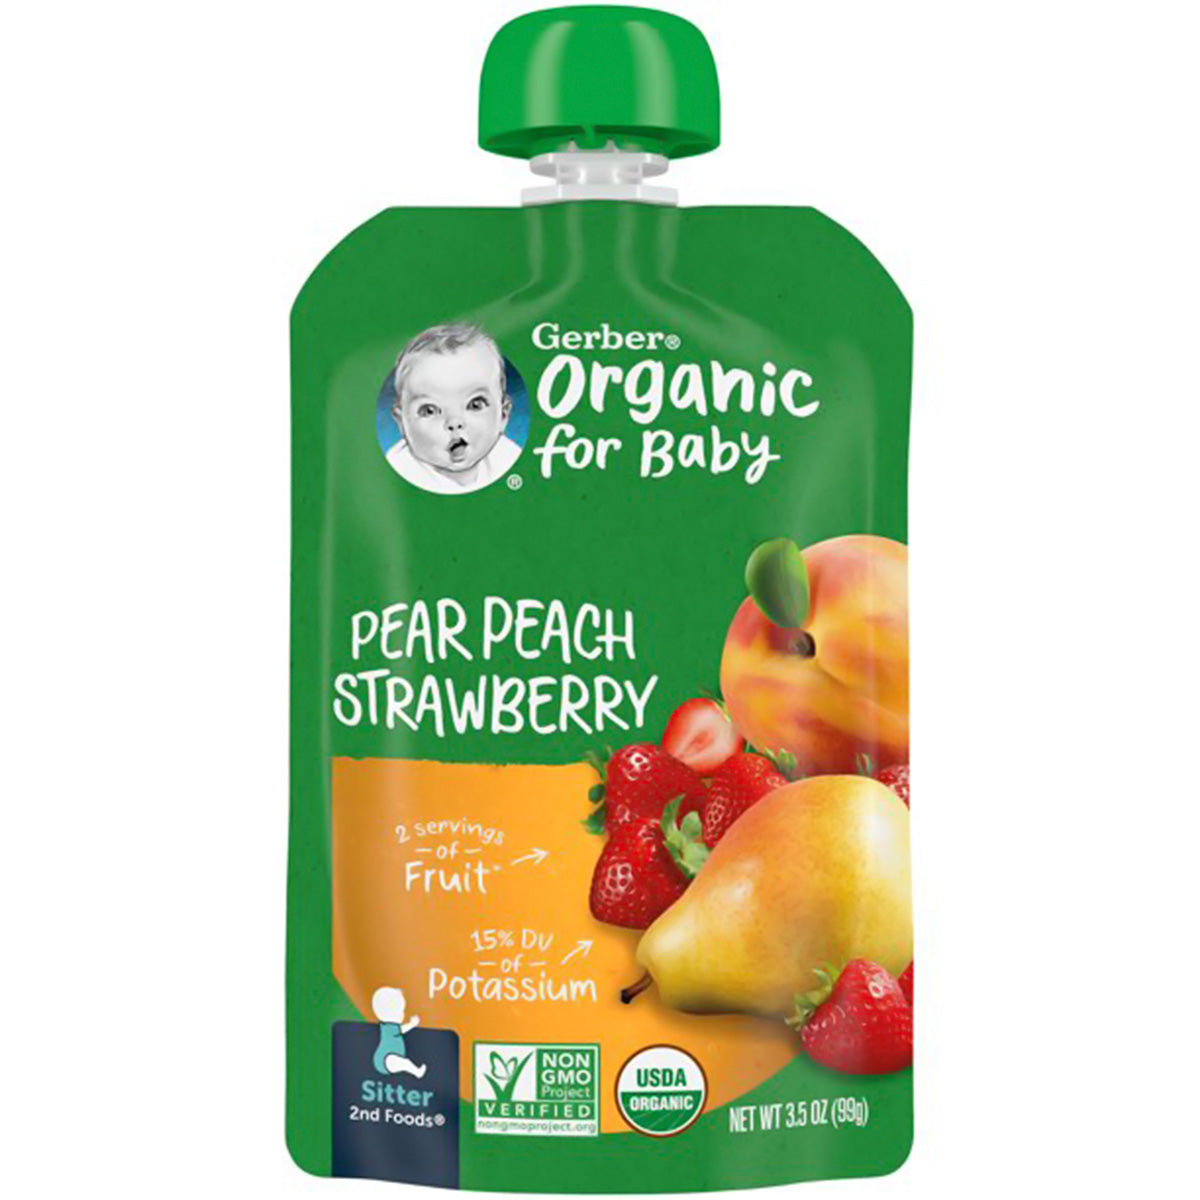 Gerber Organic for Baby, 2nd Foods for Sitter, 99g (3.5oz) - Pears, Peaches & Strawberries